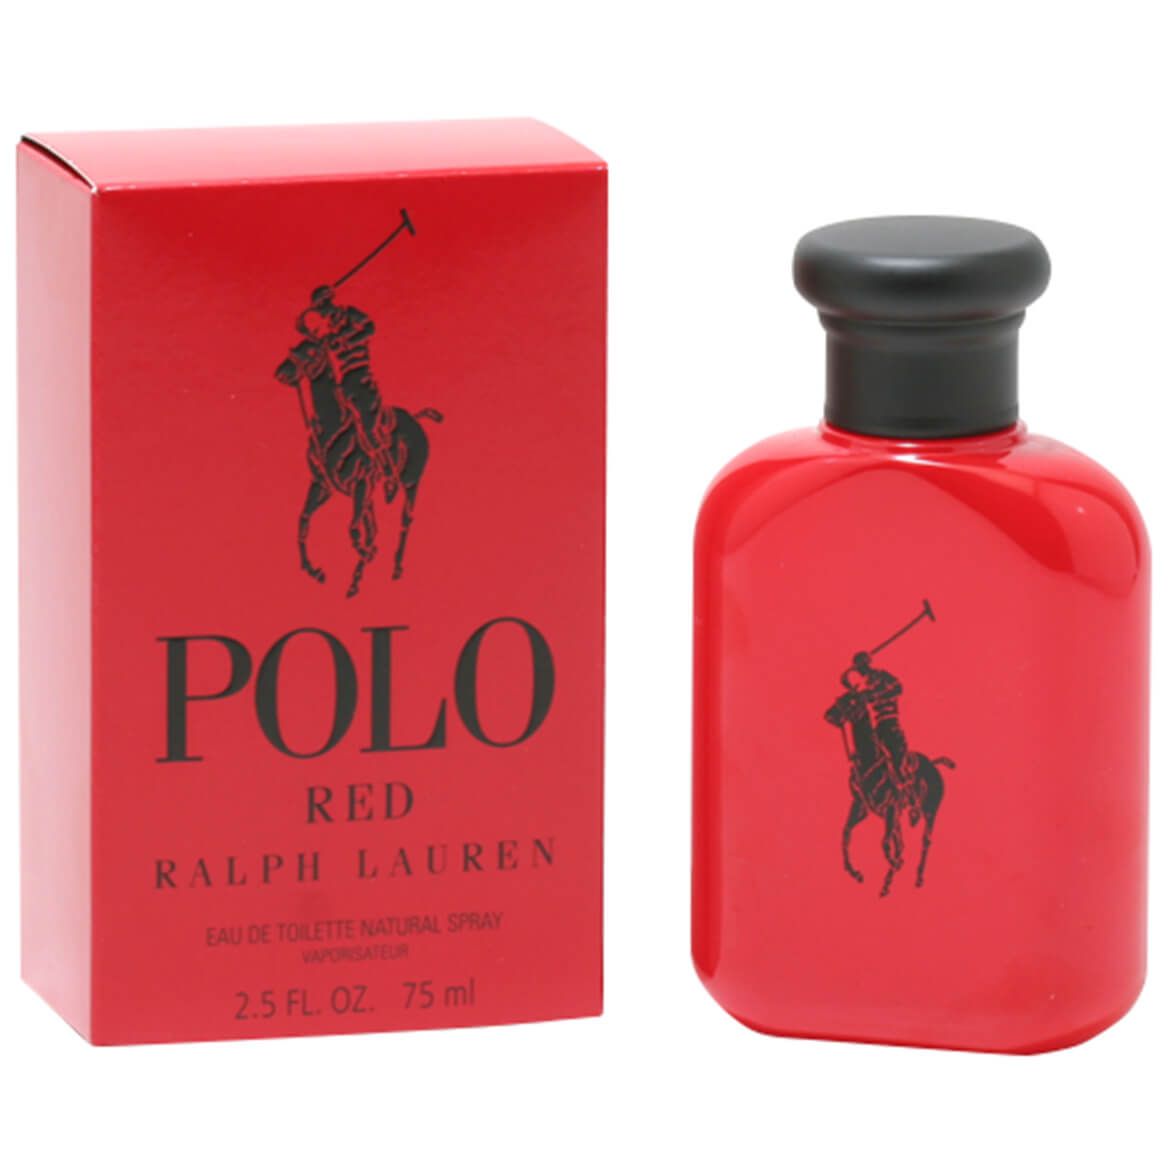 Polo Red by Ralph Lauren for Men EDT, 2.5 fl. oz. + '-' + 377171